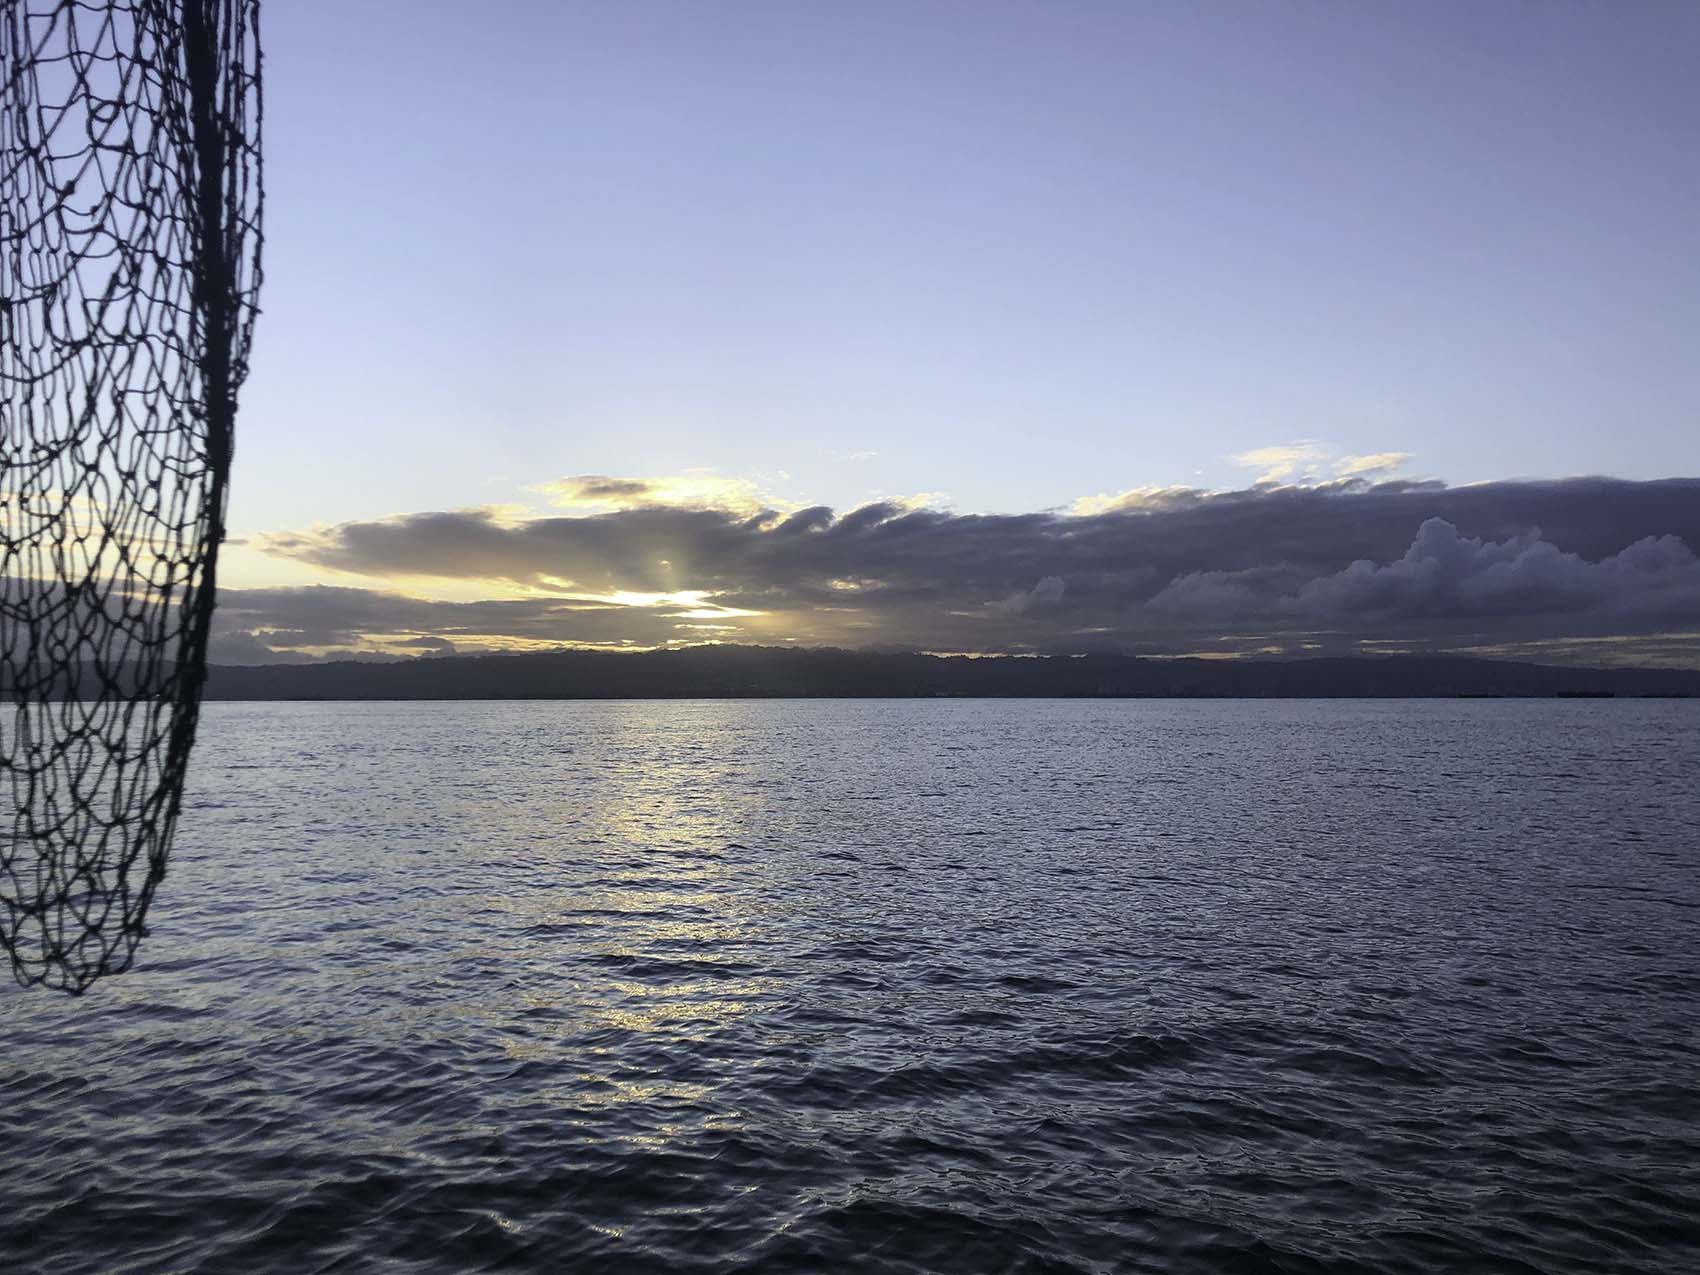 An image of San Francisco Bay at sunrise with a fishing net hanging off our boat